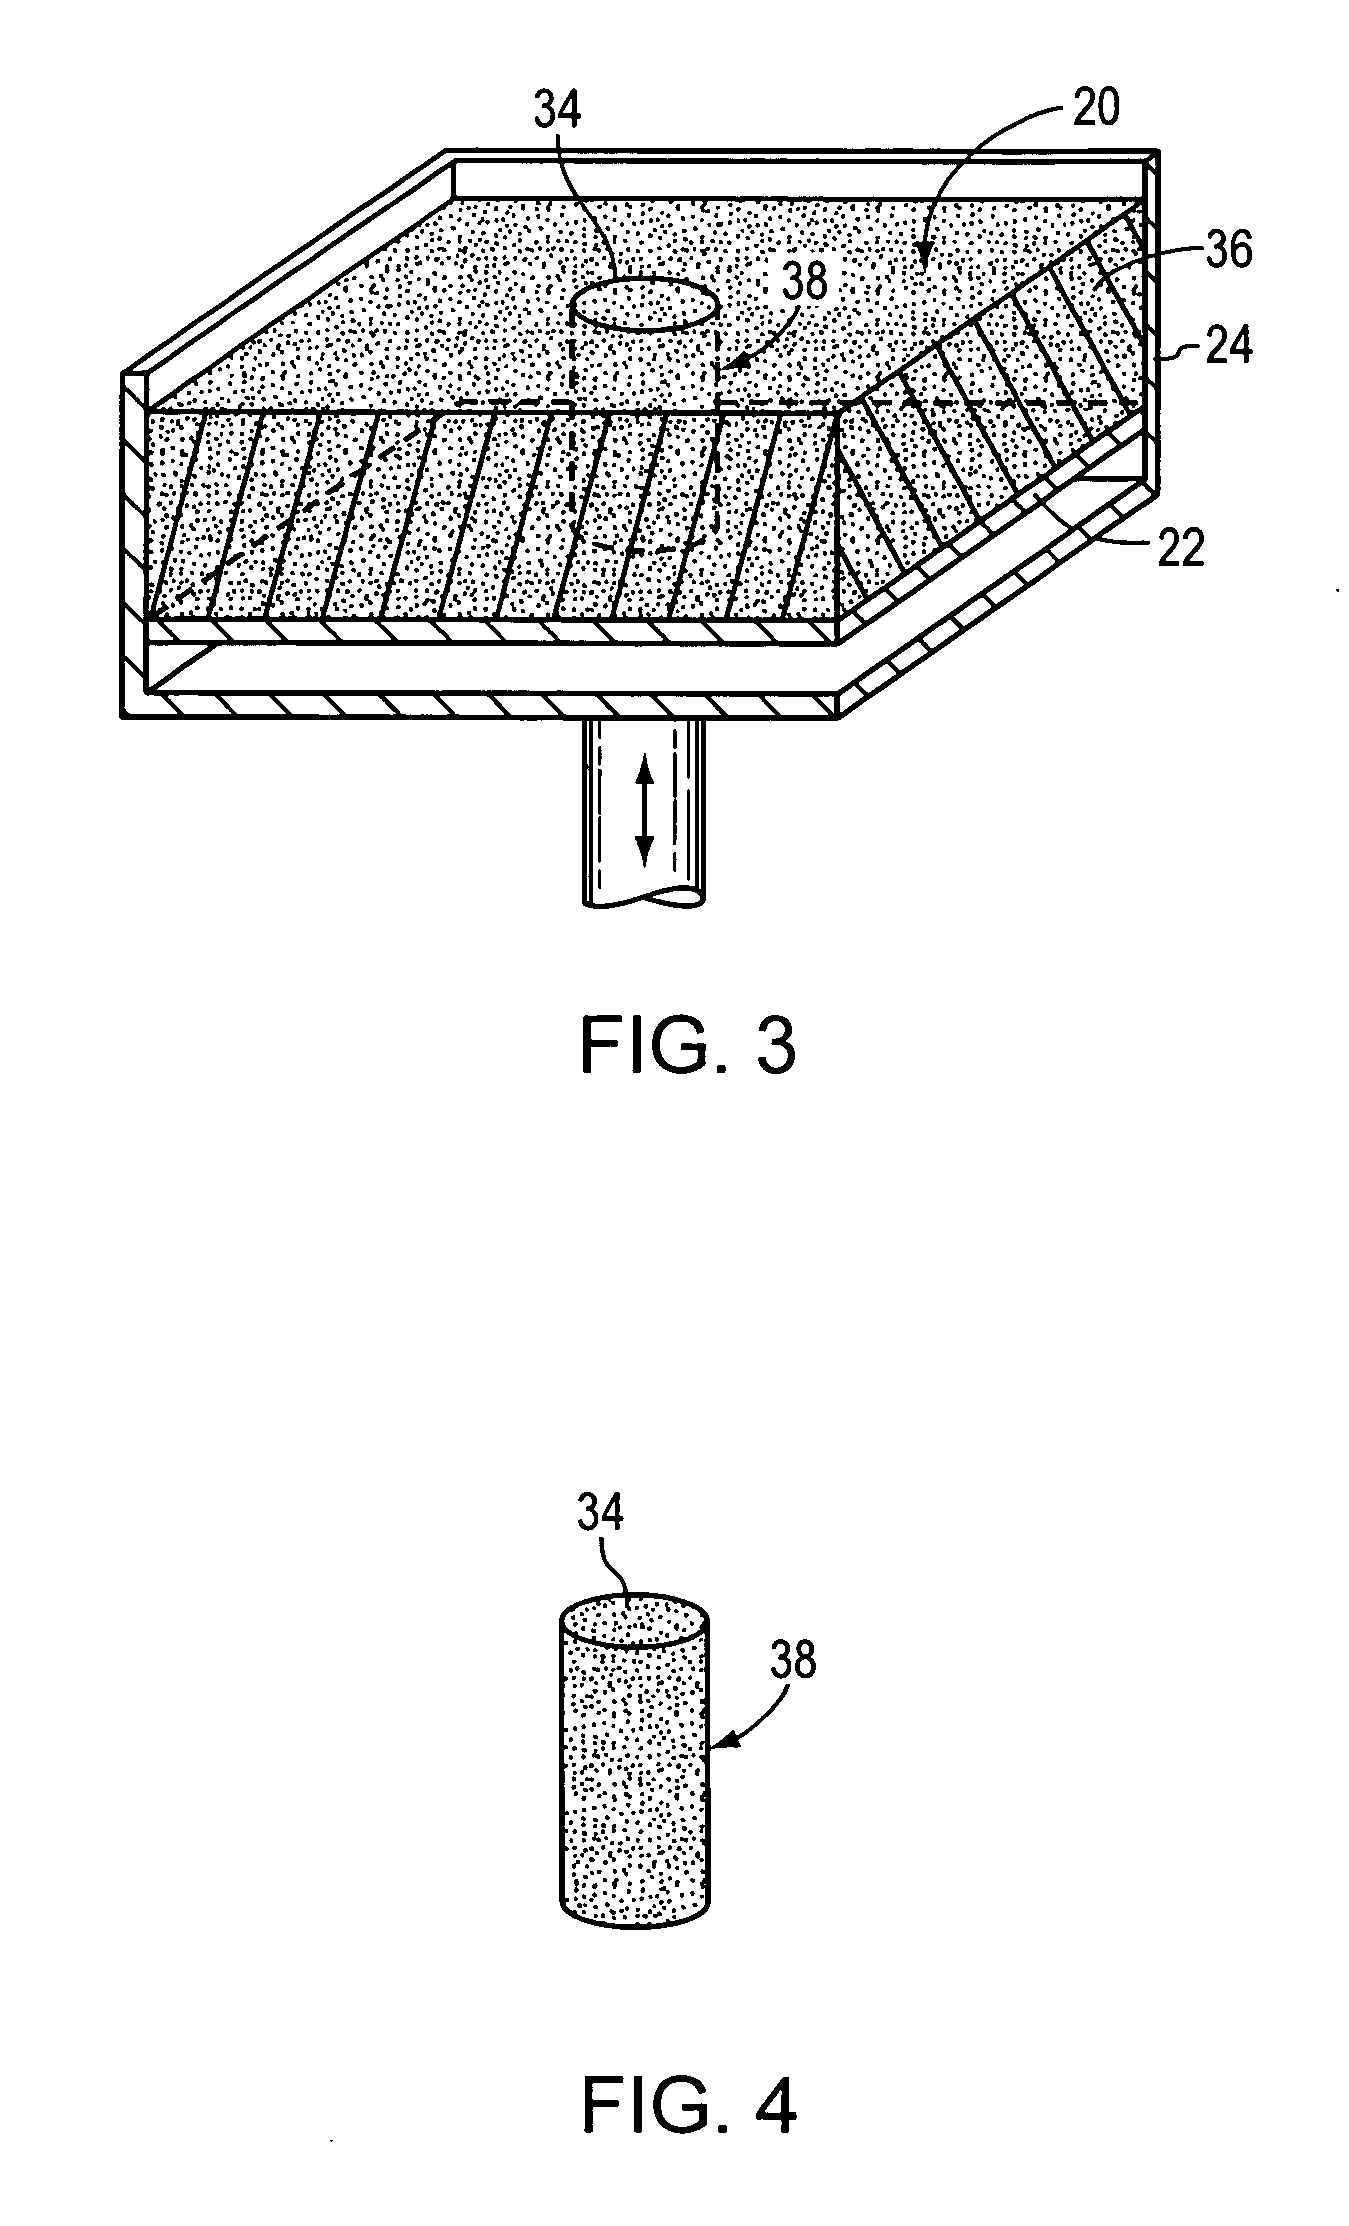 Absorbent fillers for three-dimensional printing